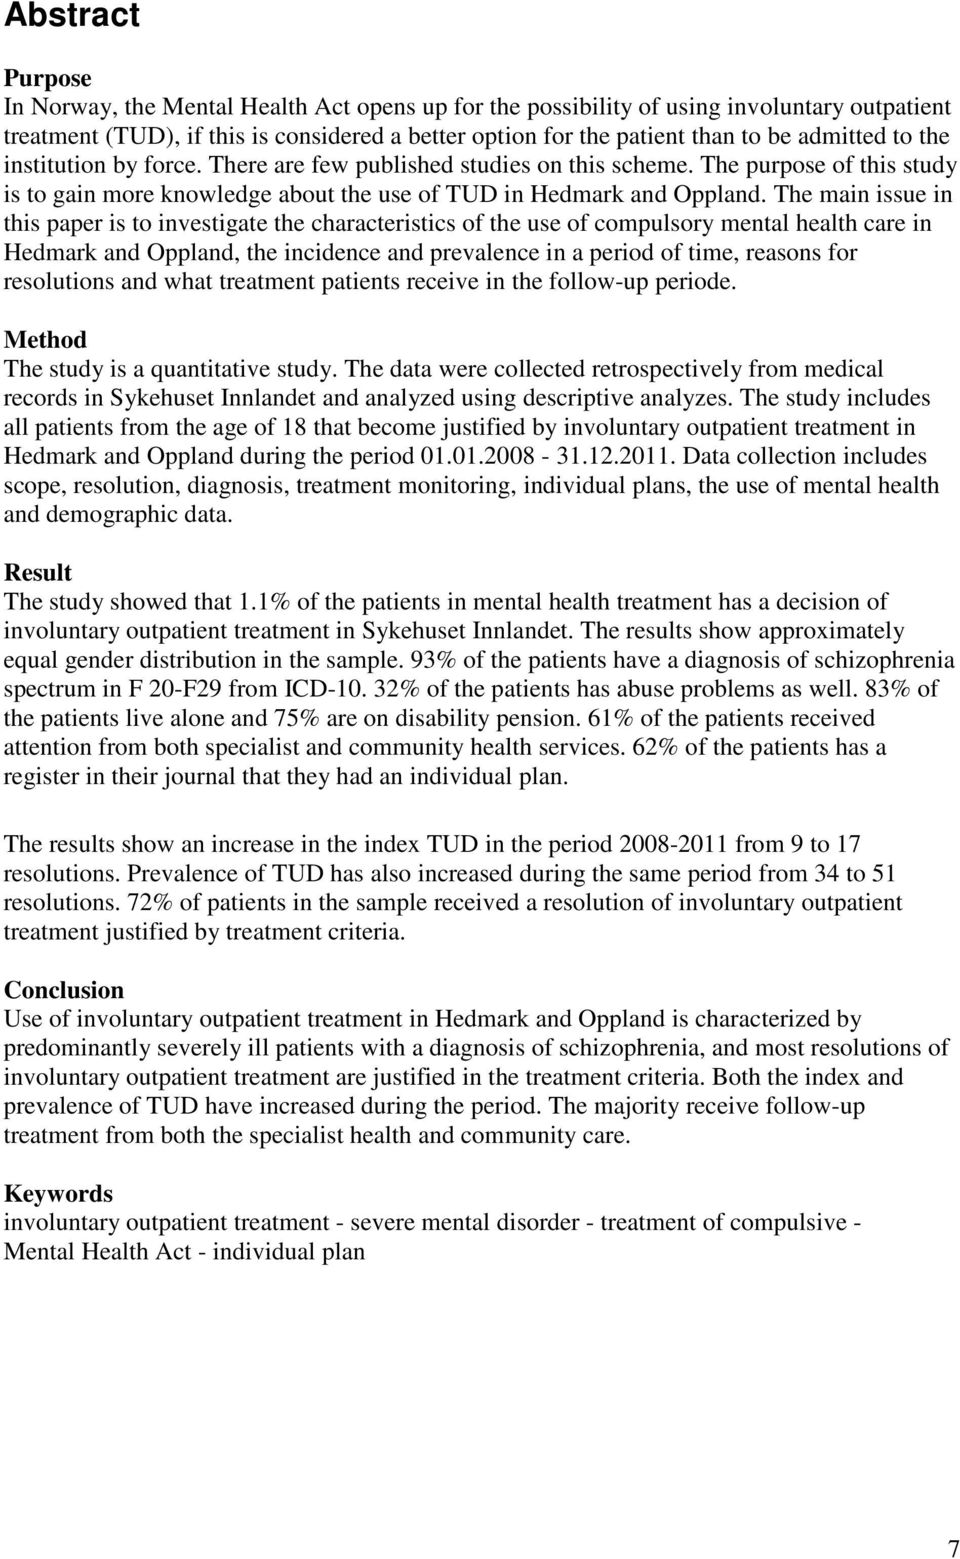 The main issue in this paper is to investigate the characteristics of the use of compulsory mental health care in Hedmark and Oppland, the incidence and prevalence in a period of time, reasons for